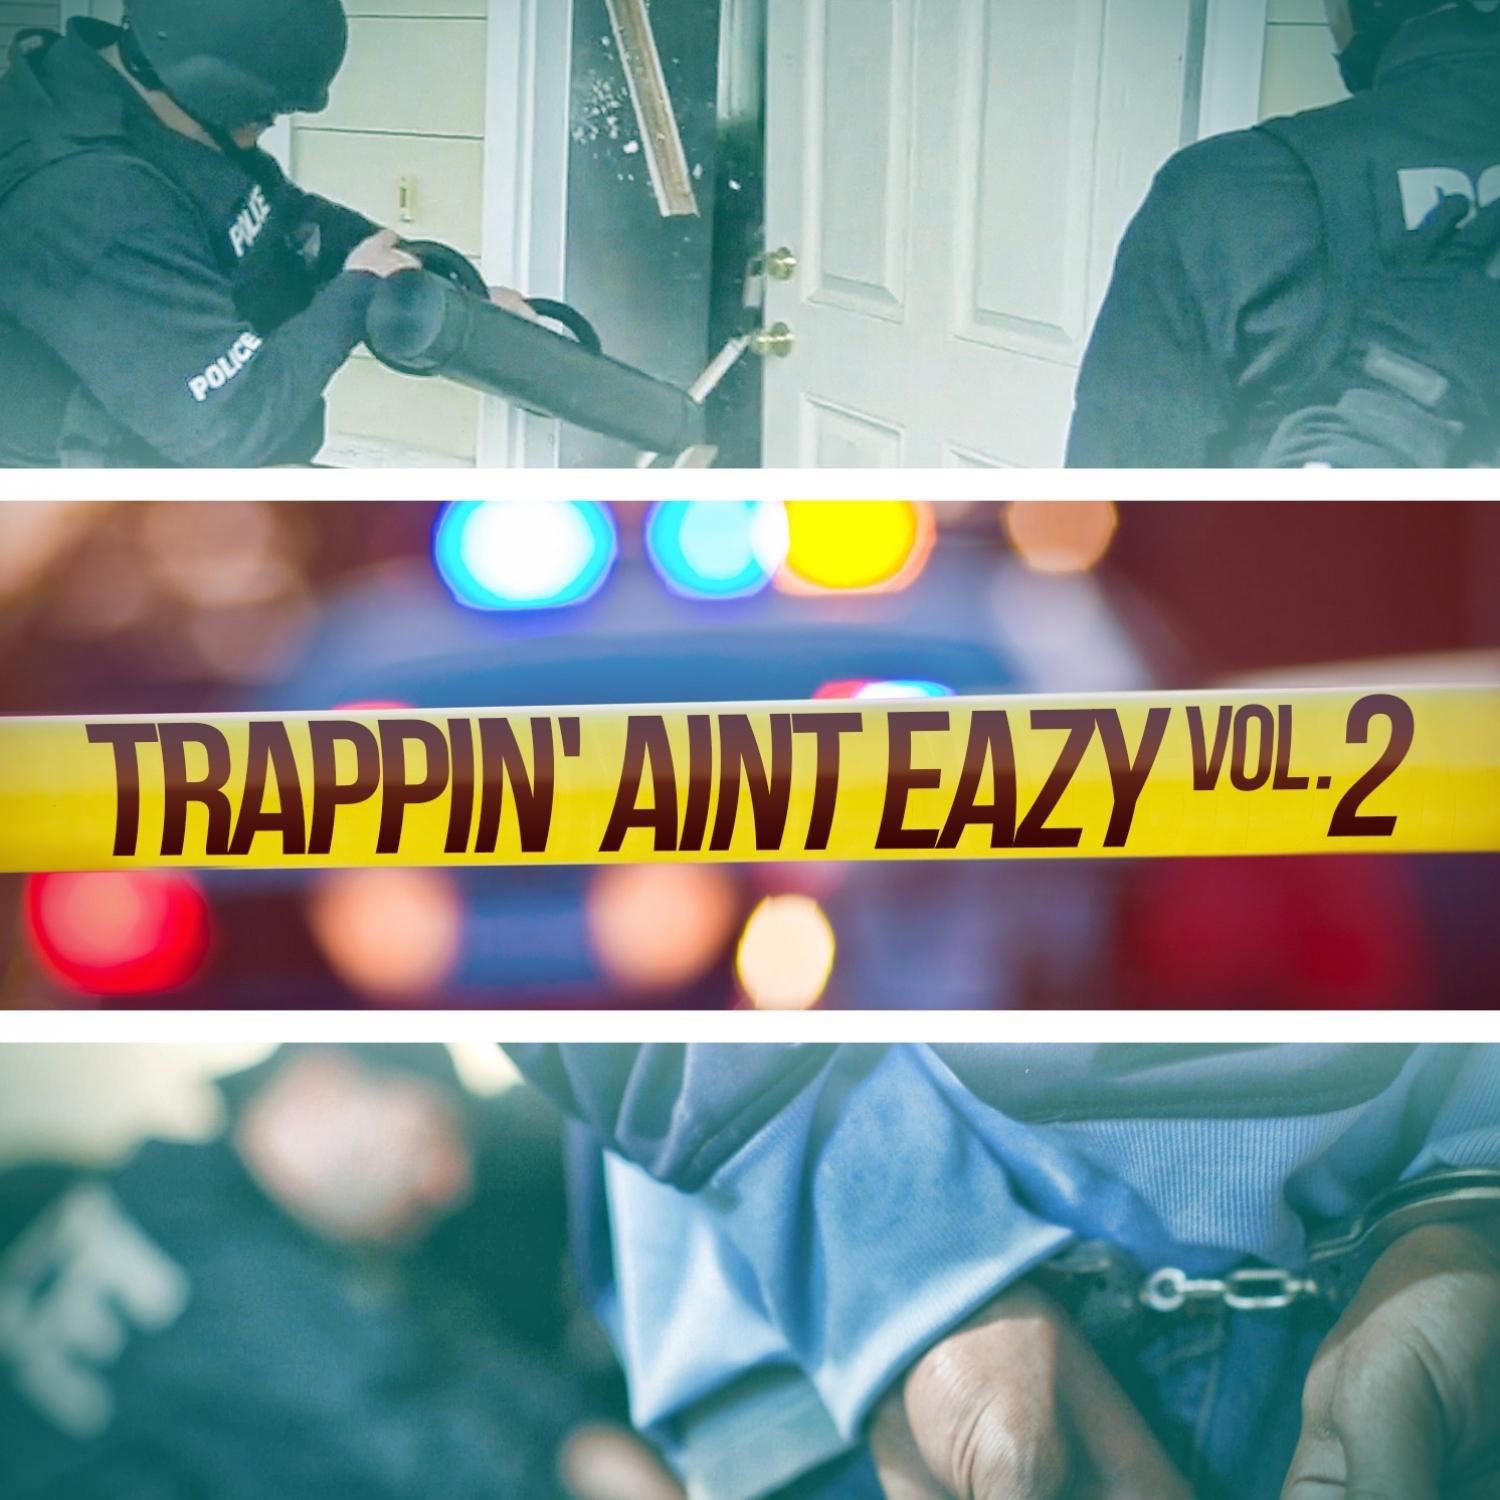 Trappin' Aint Eazy, Vol. 2